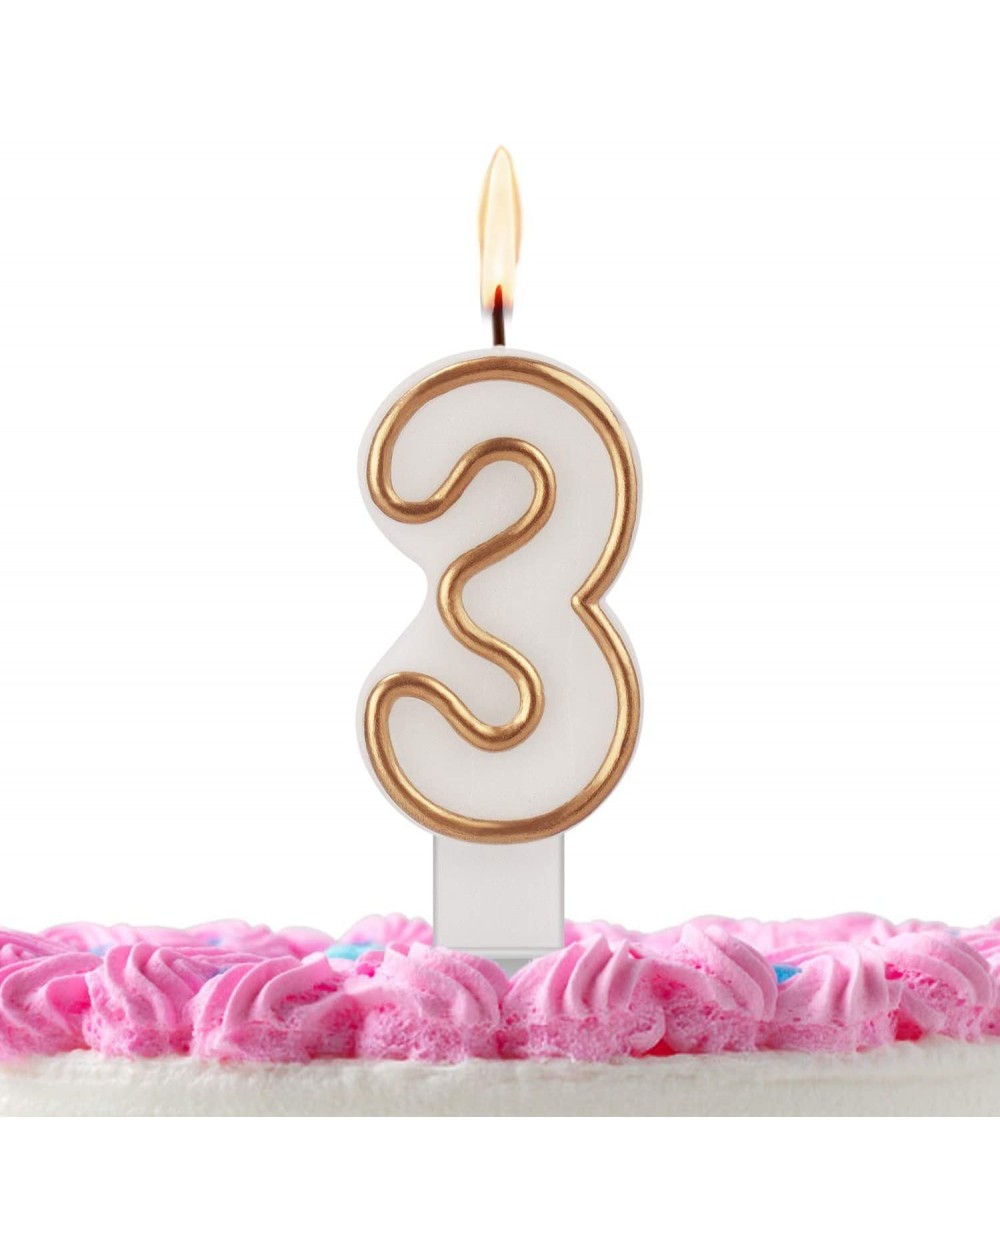 Cake Decorating Supplies Birthday Candles- Gold White Birthday Candles Numbers for Birthday Cakes- Birthday Numbers Candles f...